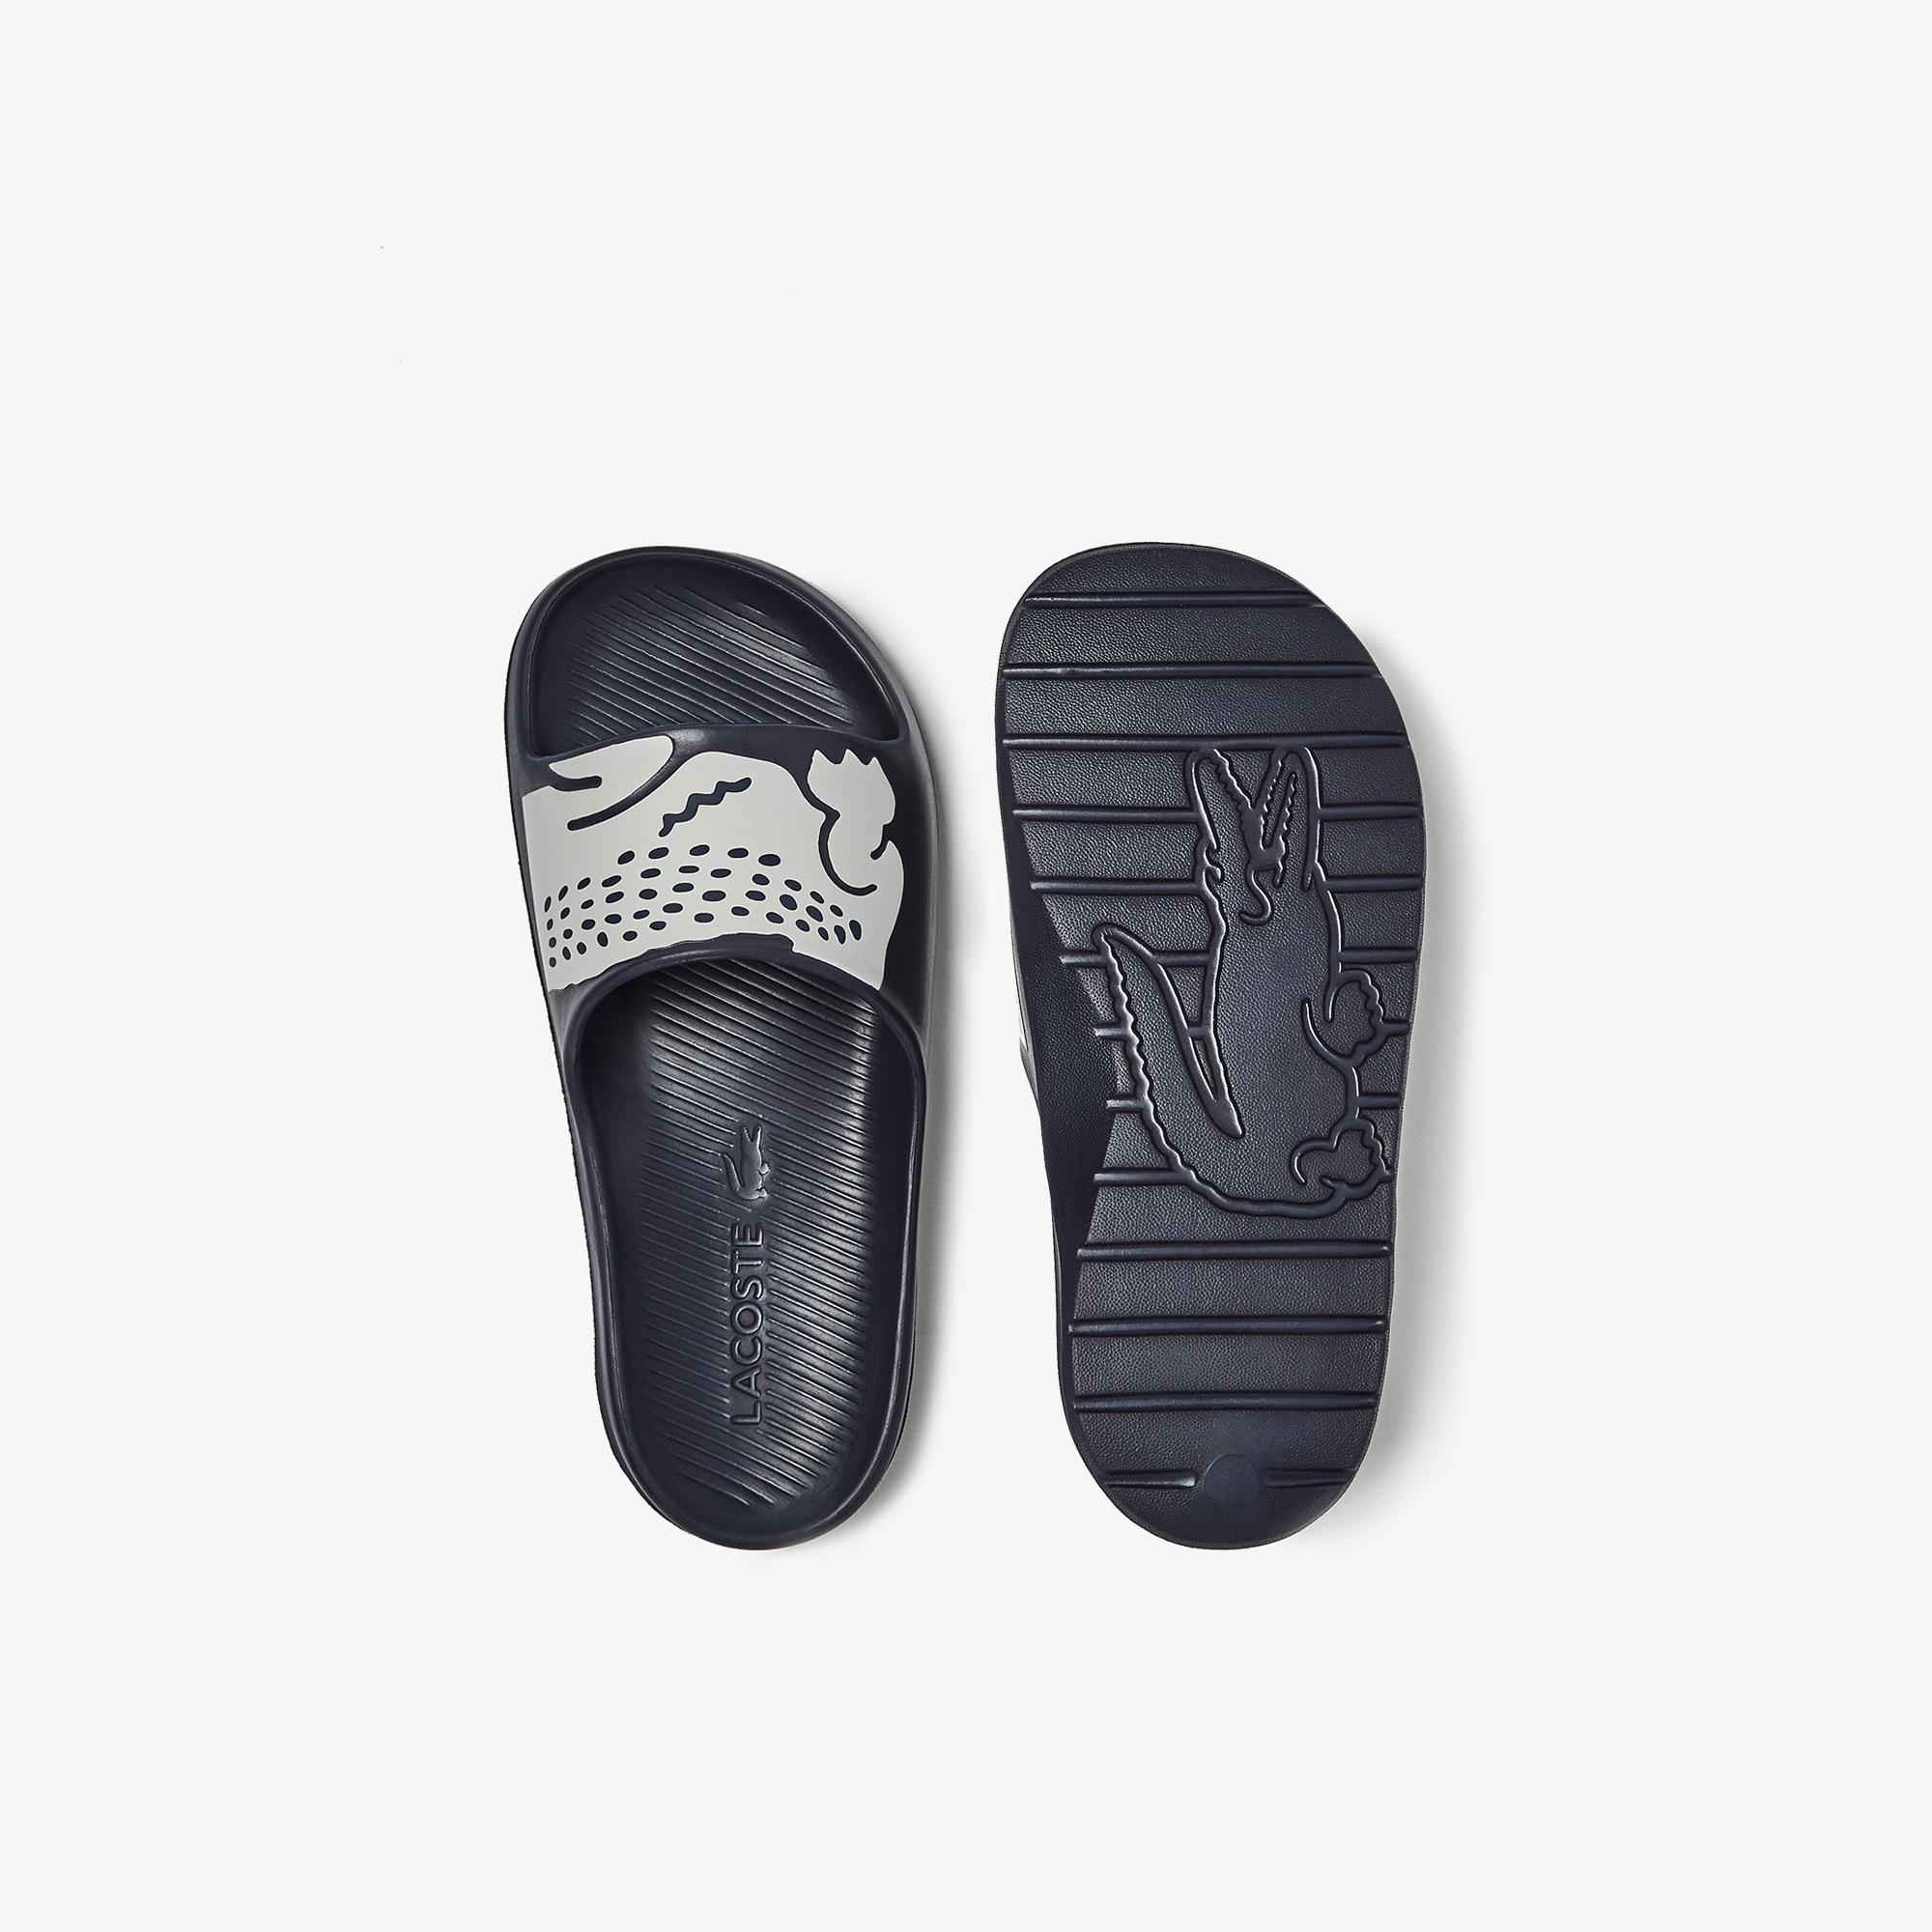 Lacoste Women's Croco 2.0 Synthetic Print Slides